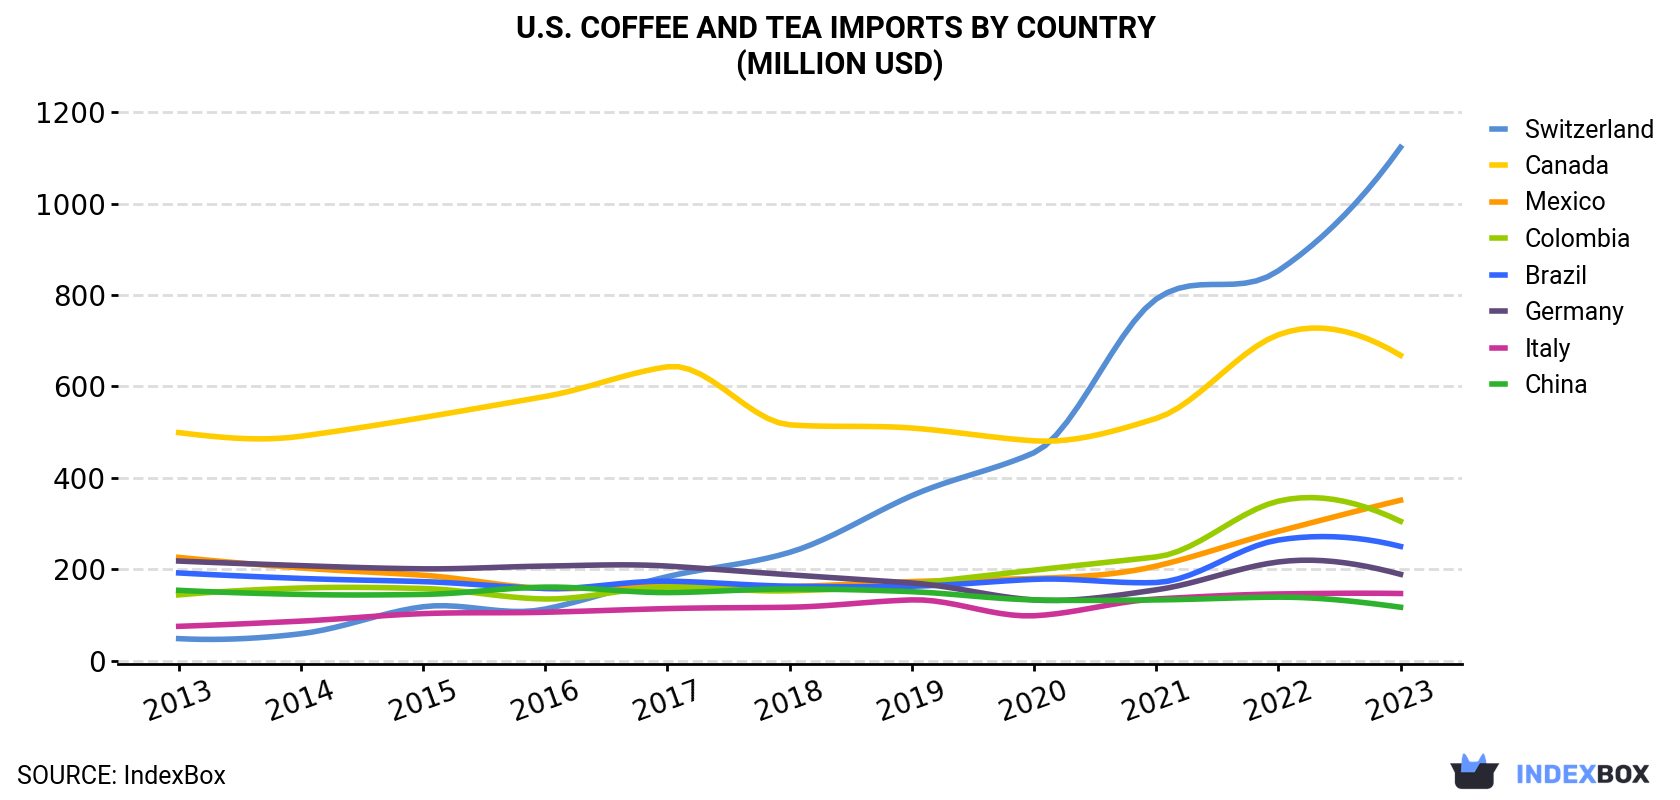 U.S. Coffee And Tea Imports By Country (Million USD)